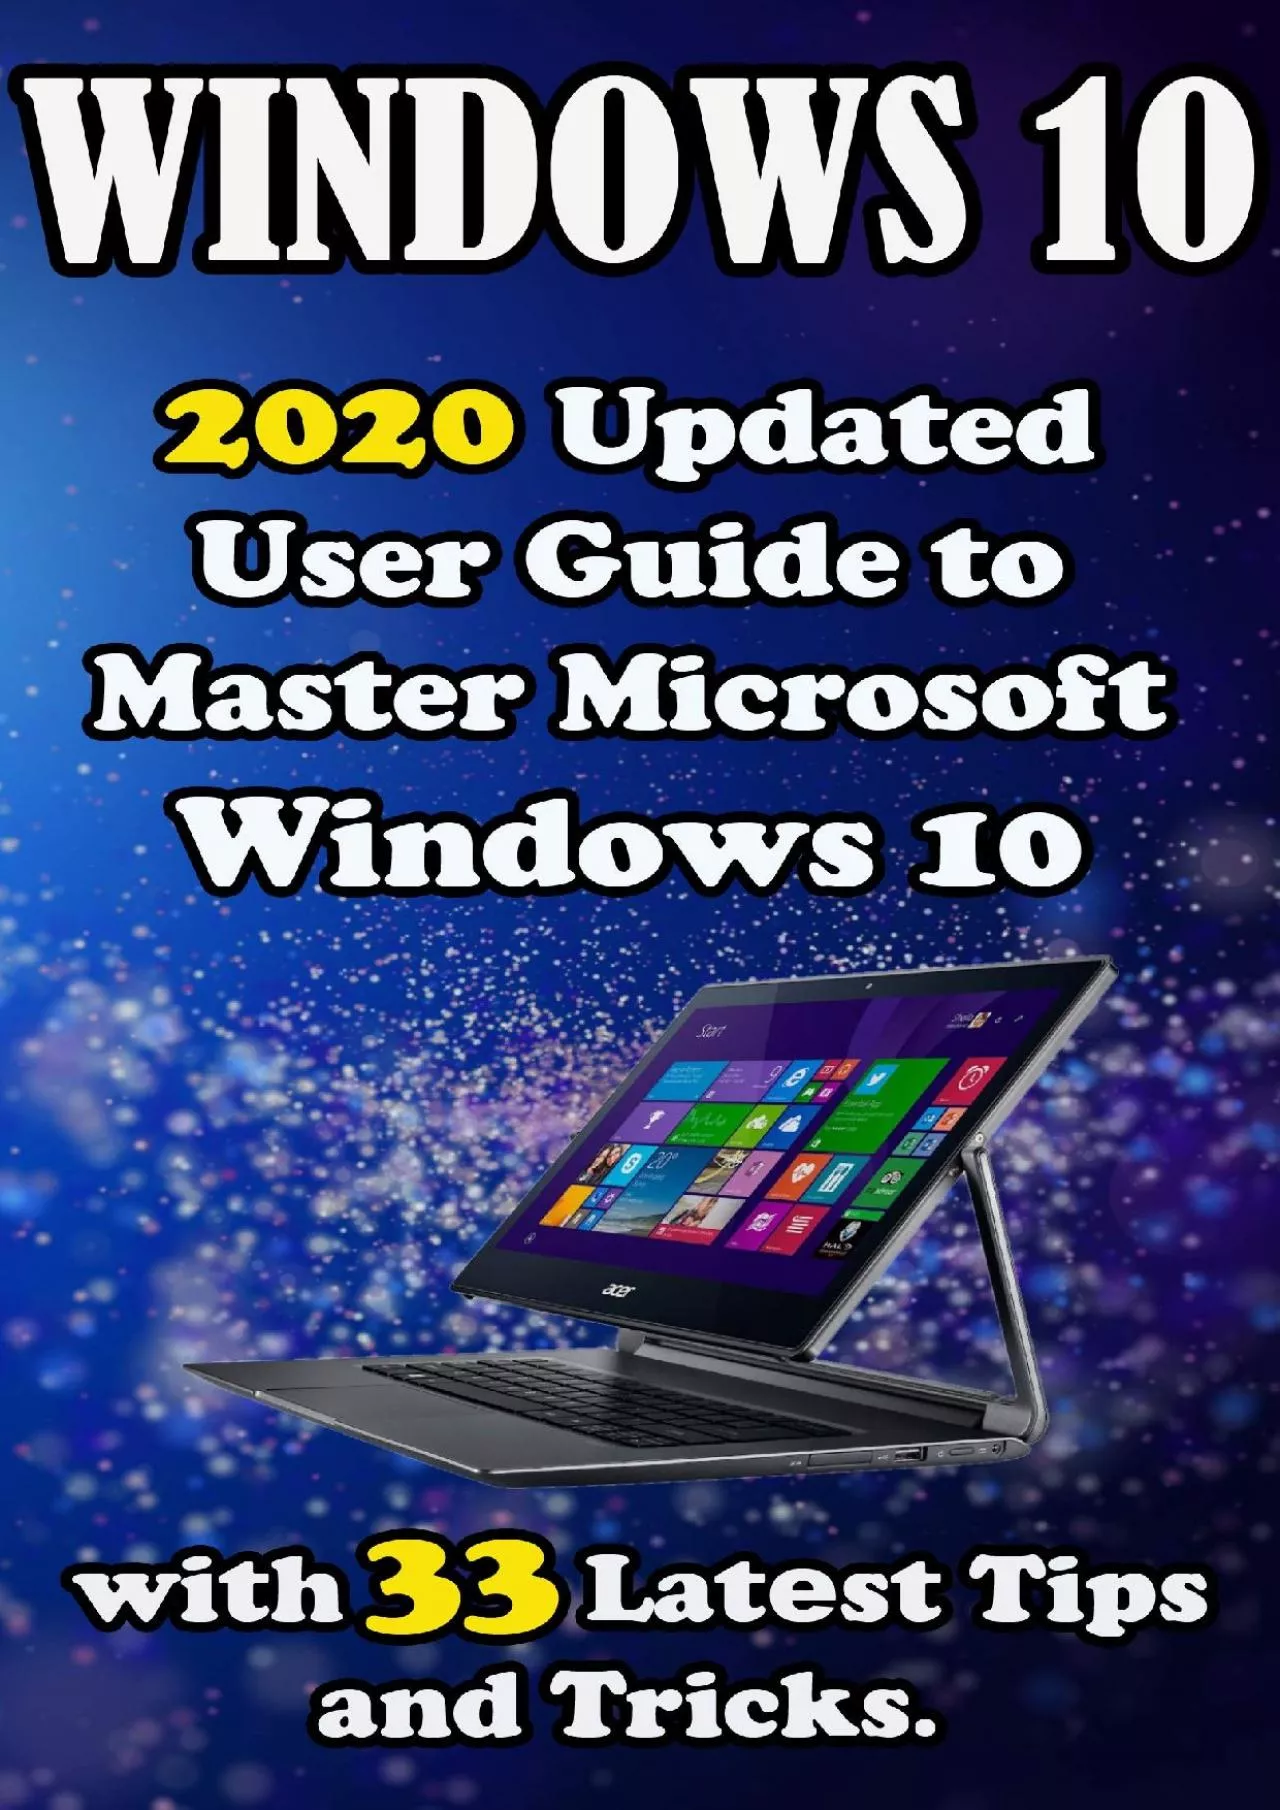 Windows 0 2020 Updat?d Us?r Guid? to Mast?r Microsoft Windows 0 with 33 Lat?st Tips and